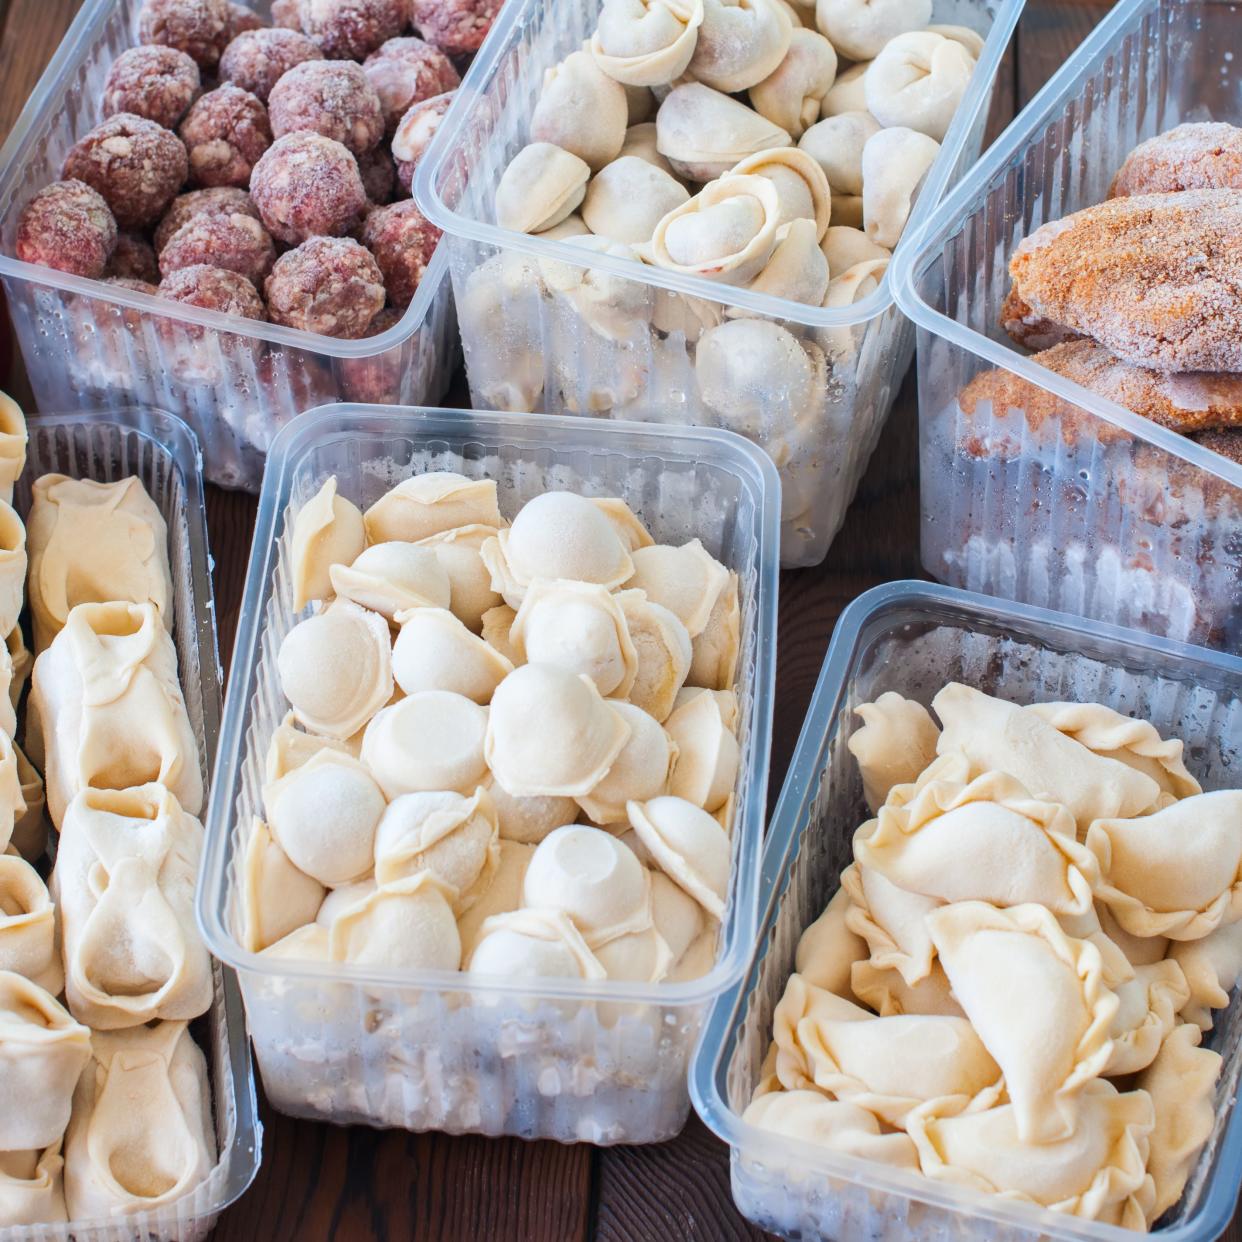 Assortment of Pocket items. Semifinished meatballs, dumplings, pierogi in plastic containers.